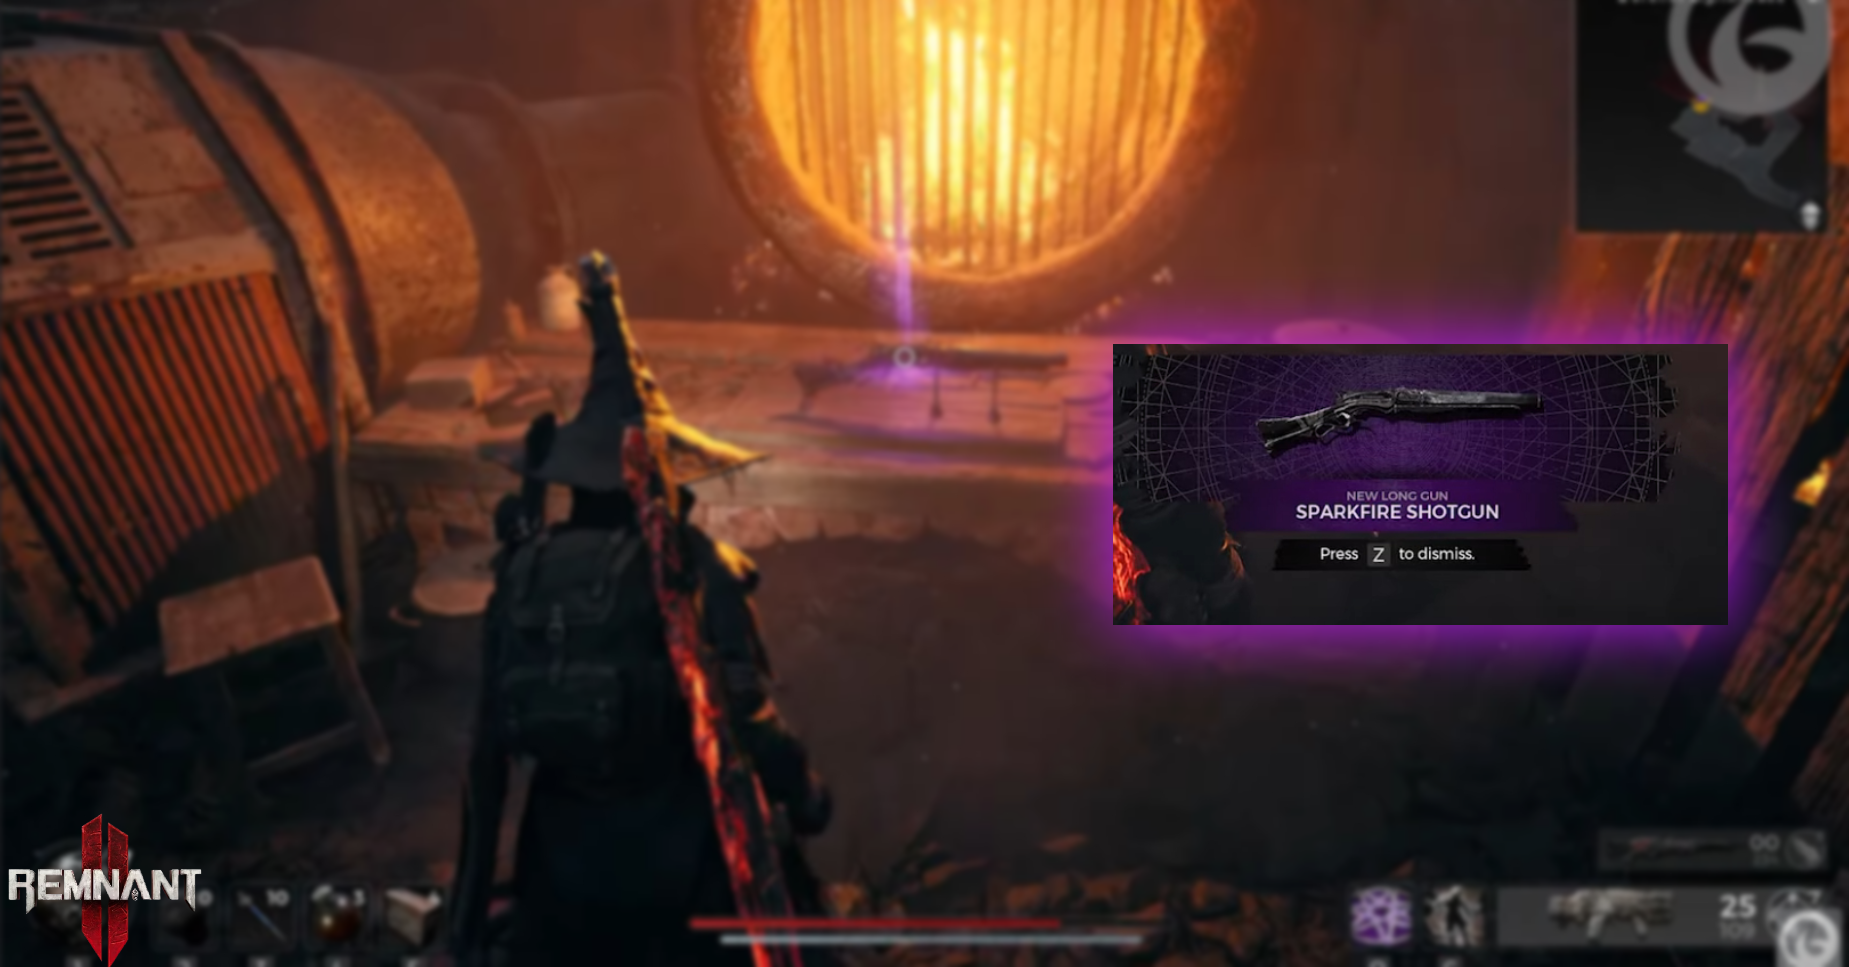 You are currently viewing How To Find Sparkfire Shotgun In Remnant 2